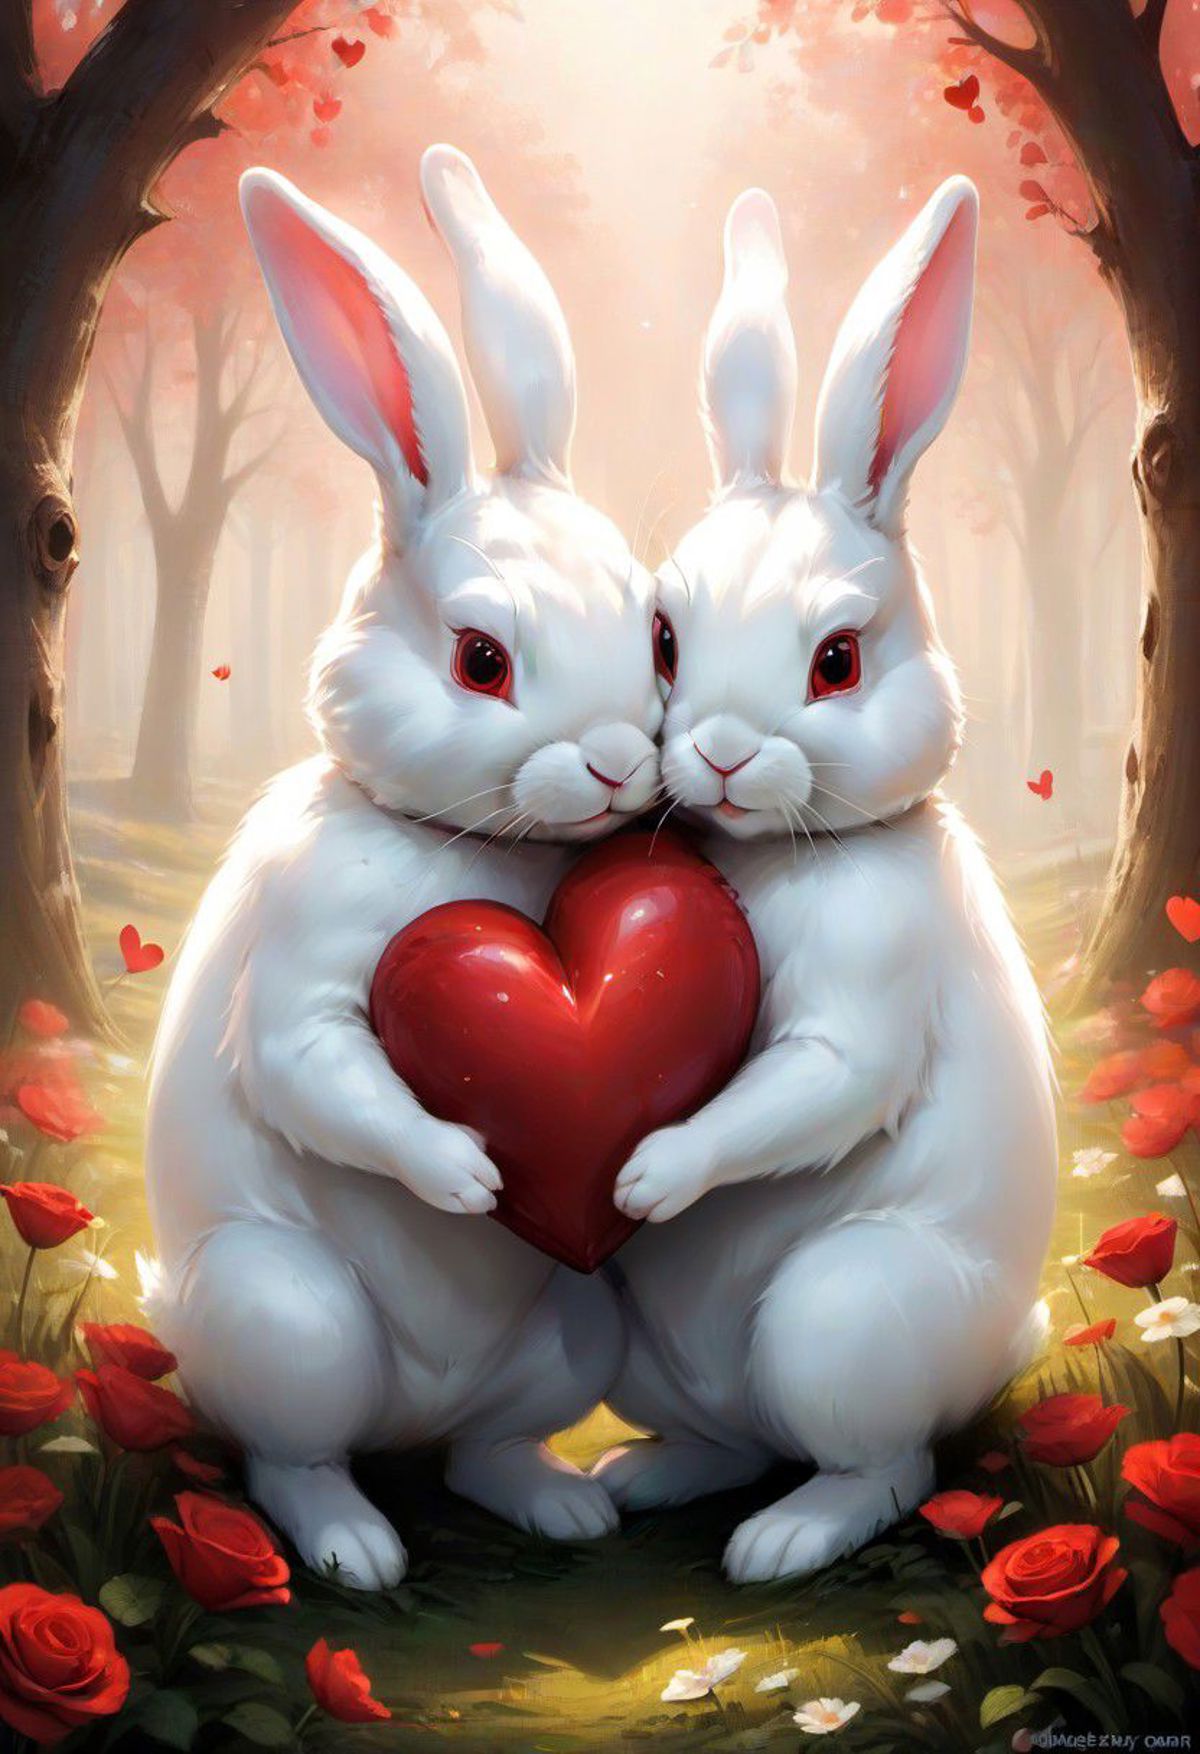 Two white bunnies hugging each other in front of a heart.